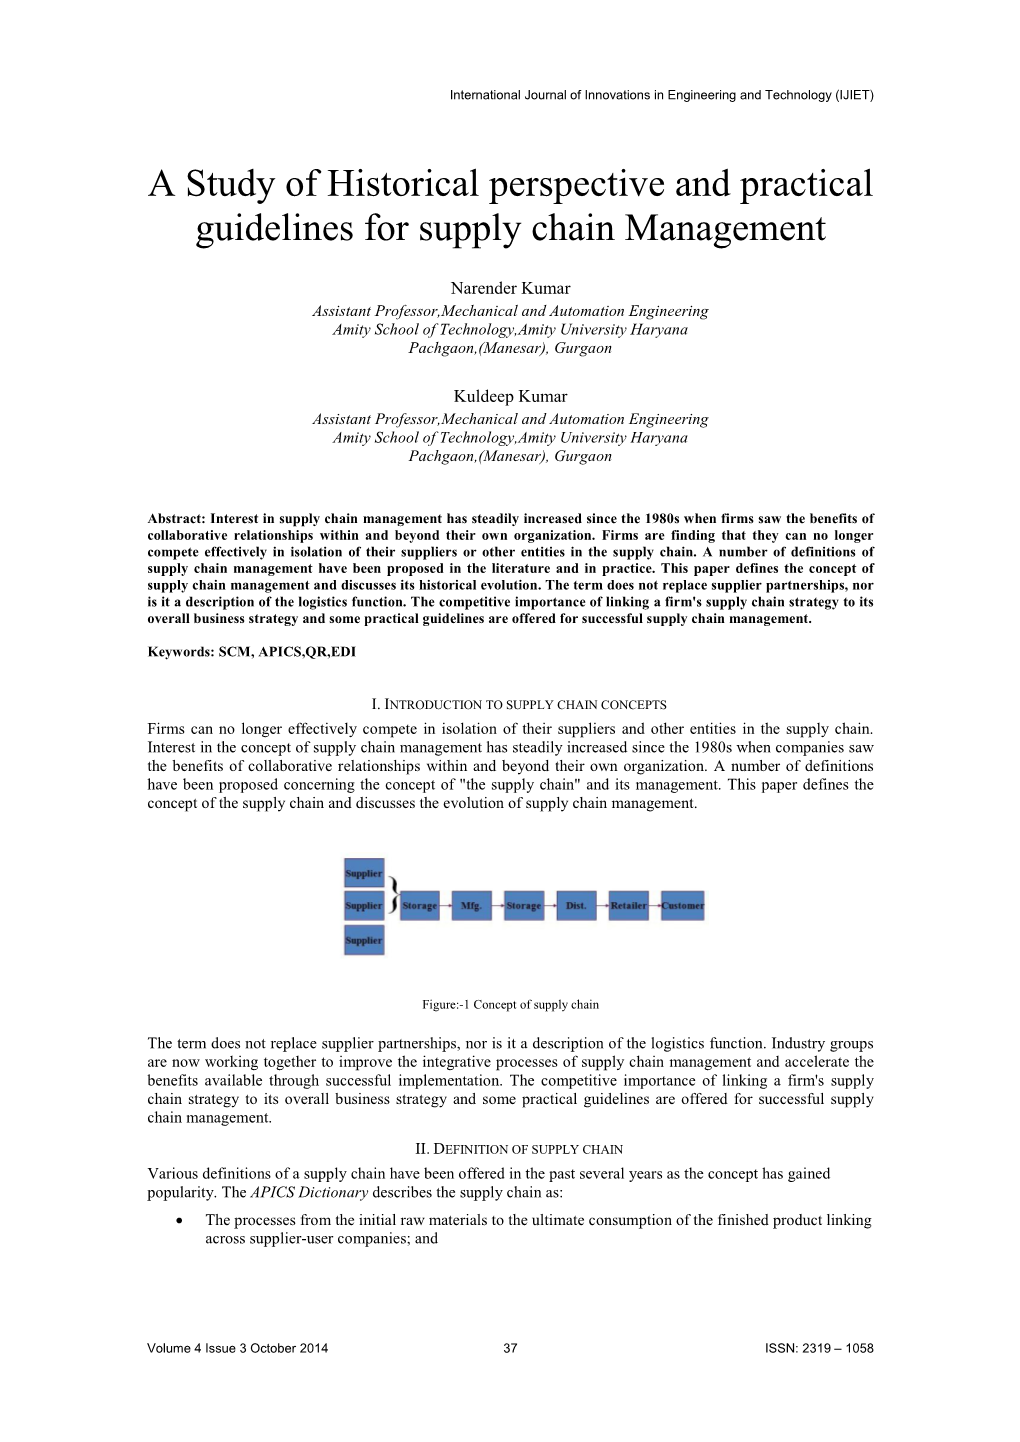 A Study of Historical Perspective and Practical Guidelines for Supply Chain Management